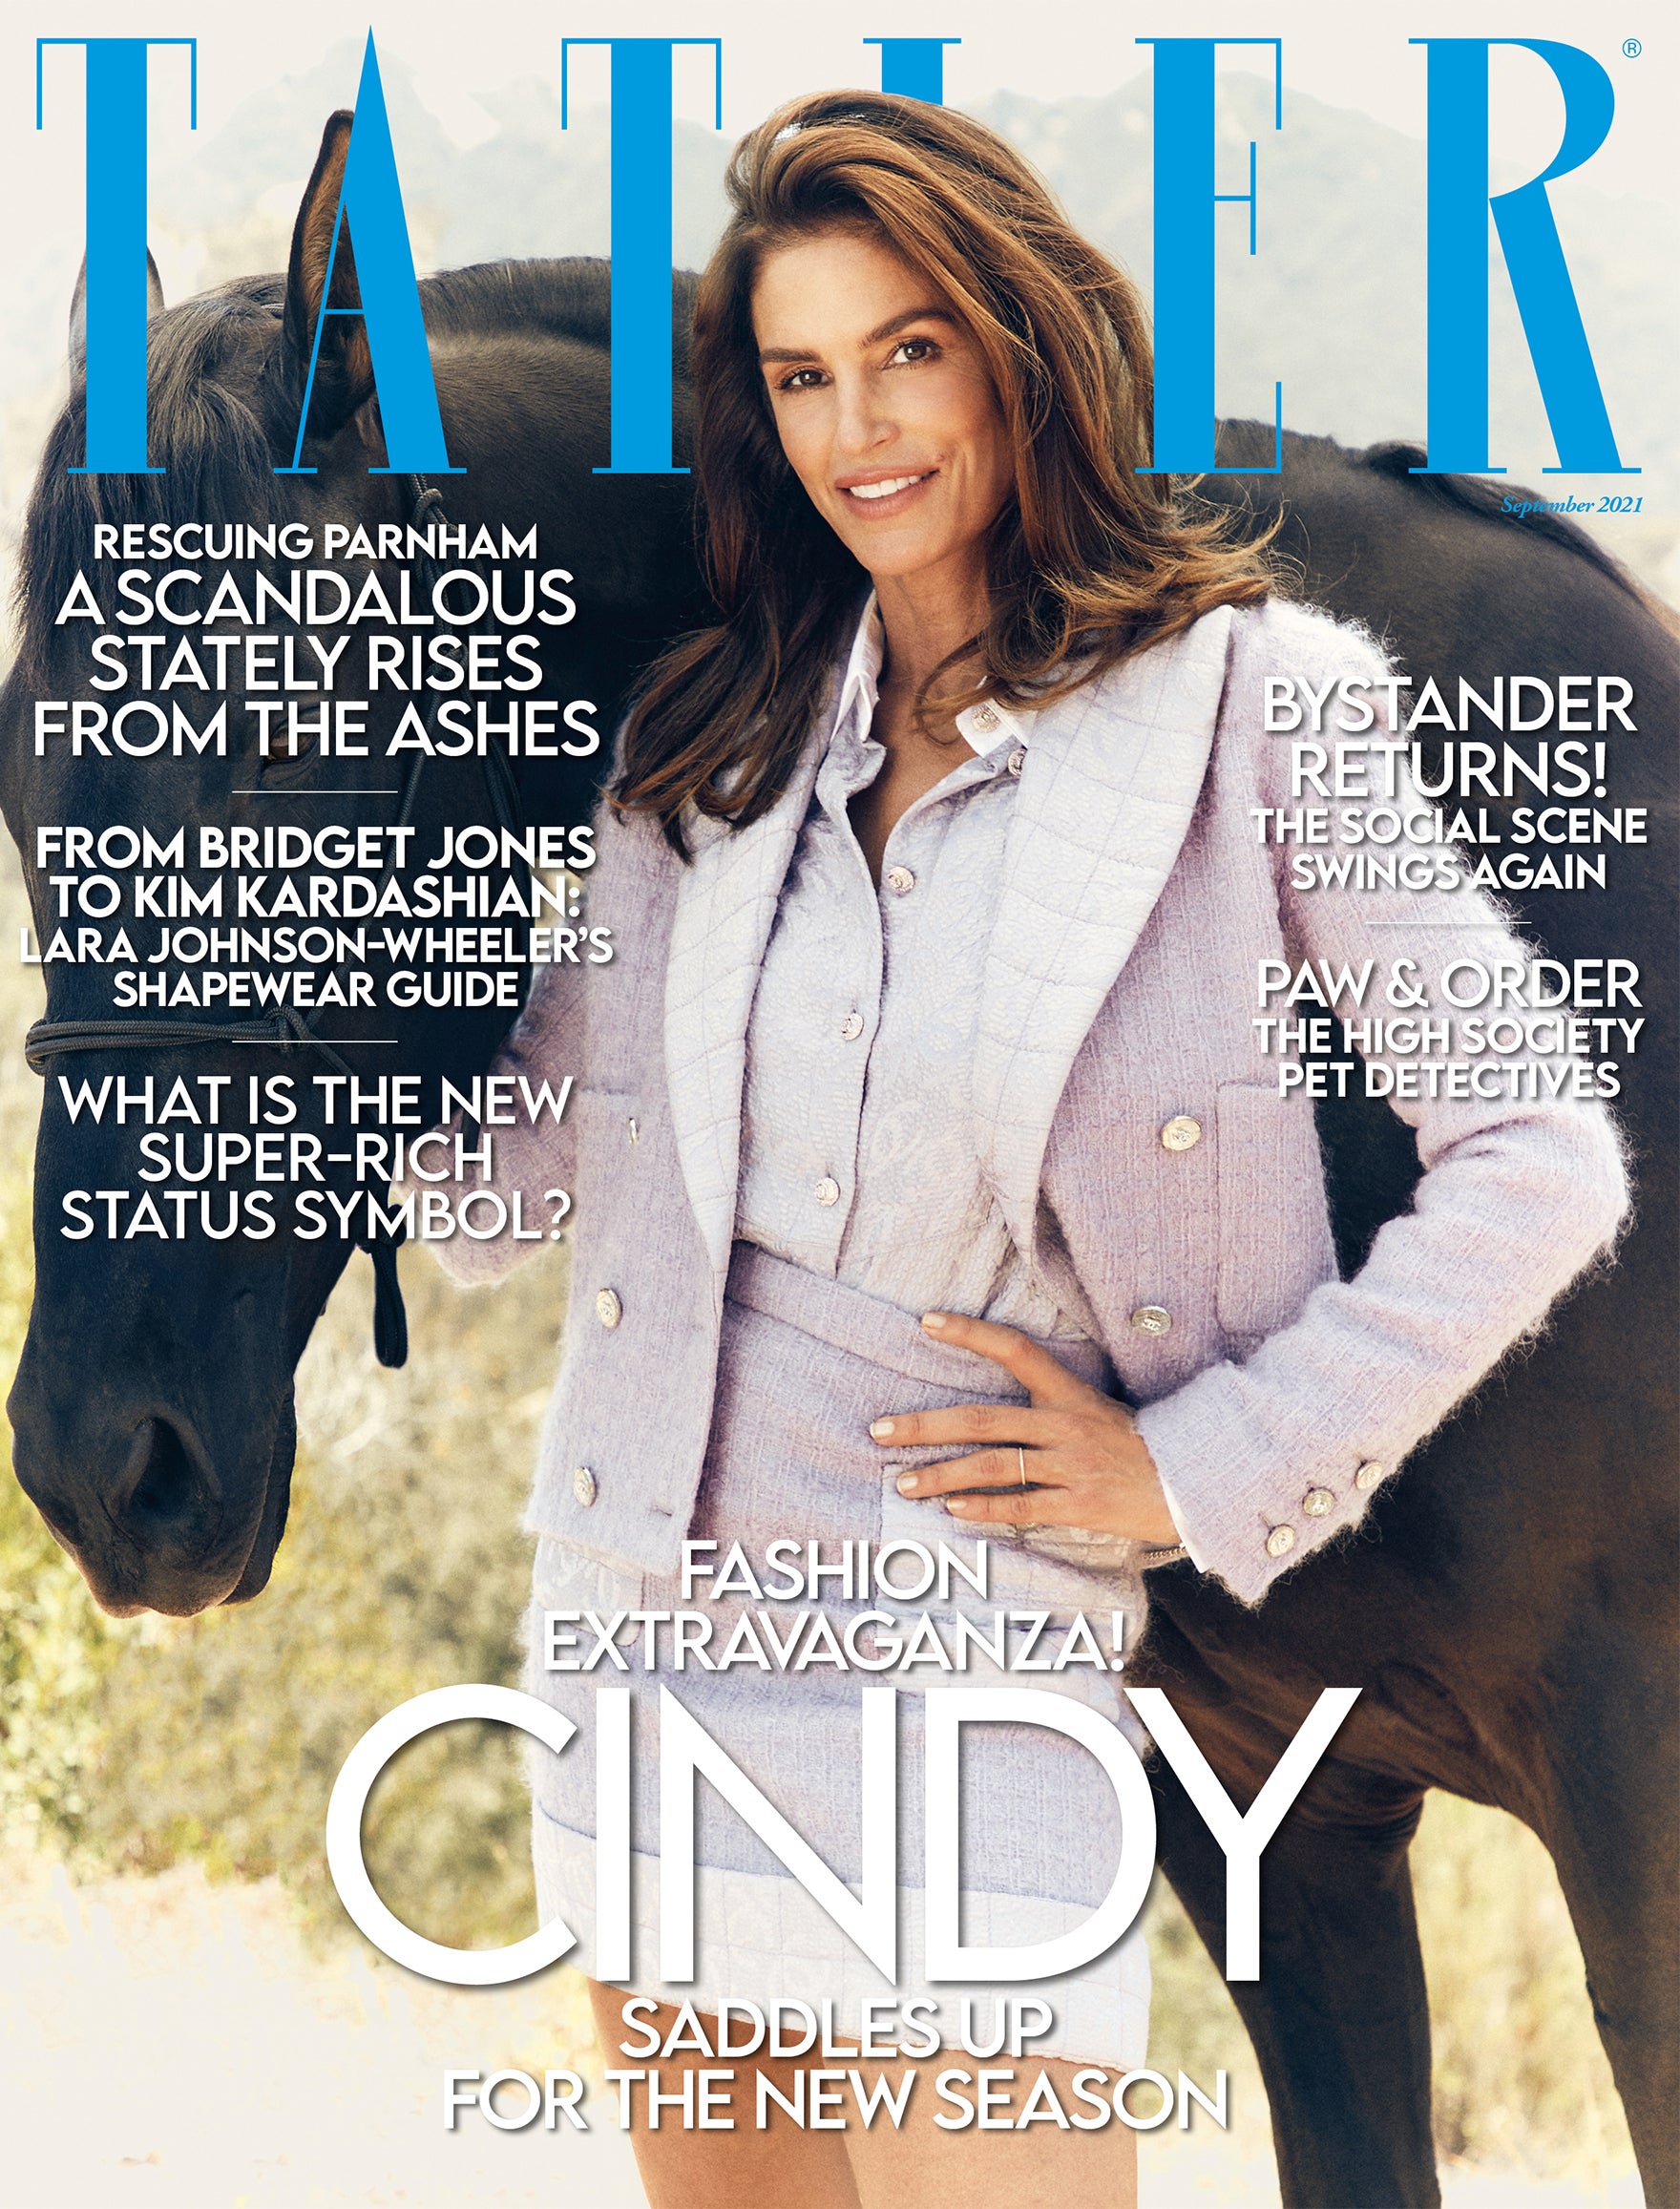 The full feature is in the September issue of Tatler